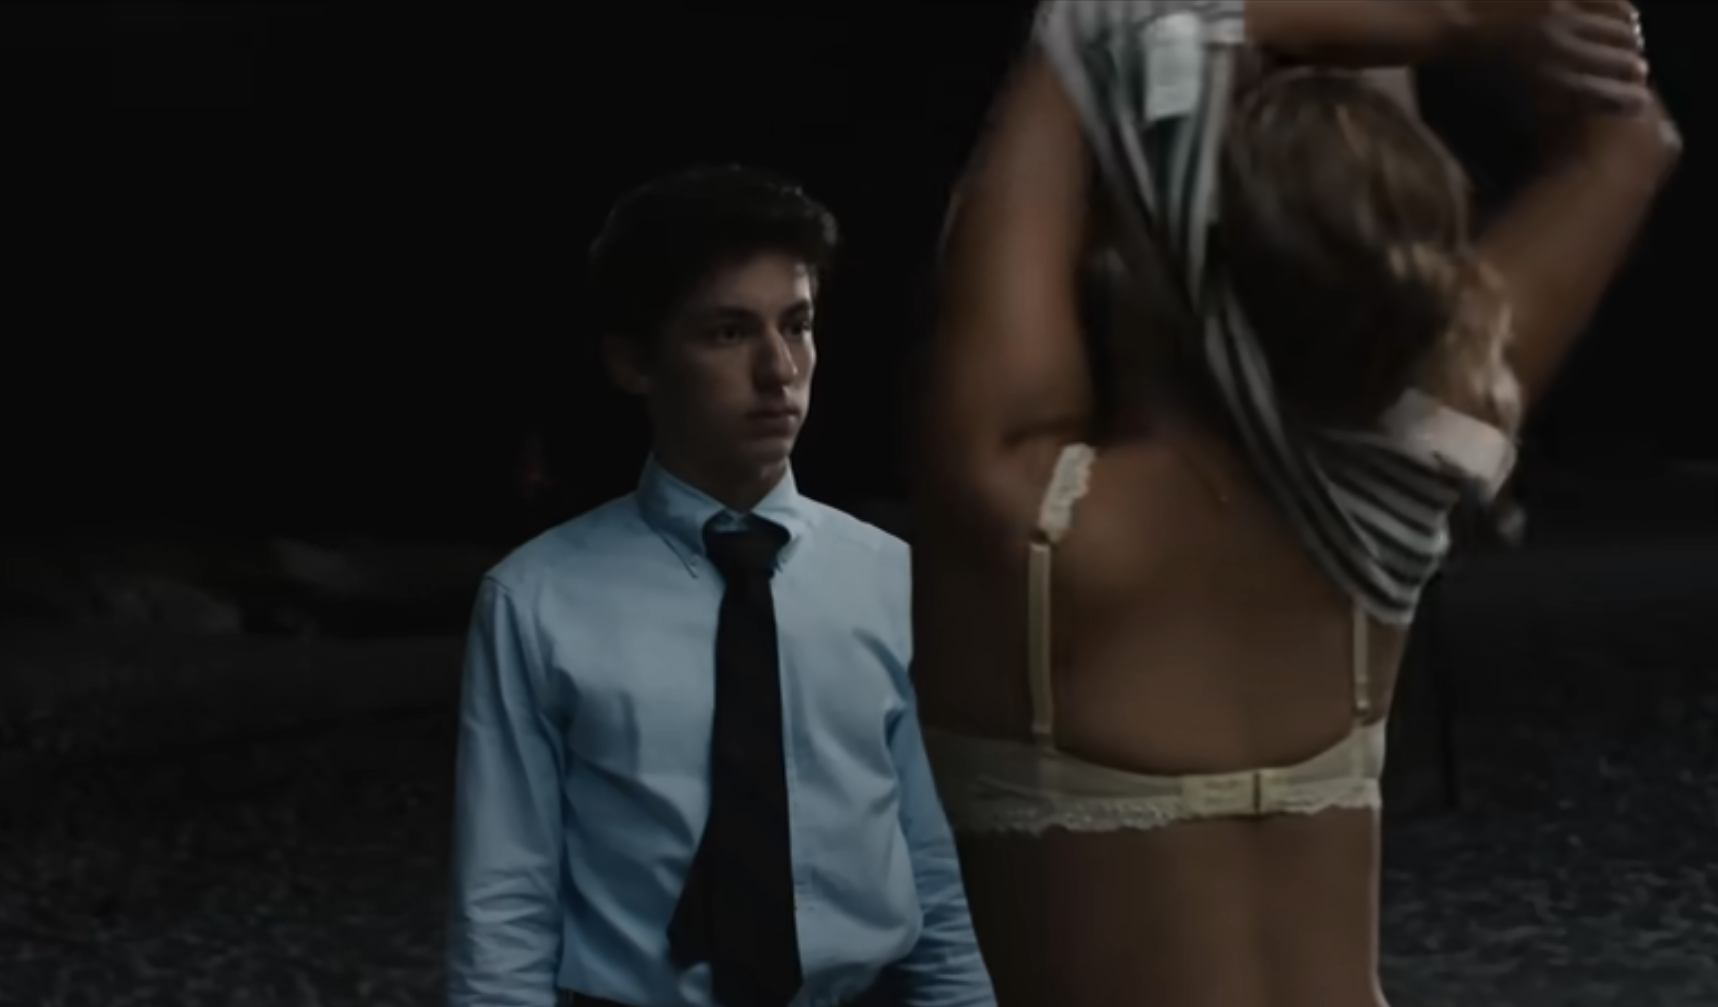 Maddie takes her top off as Percy looks on in a scene from the film